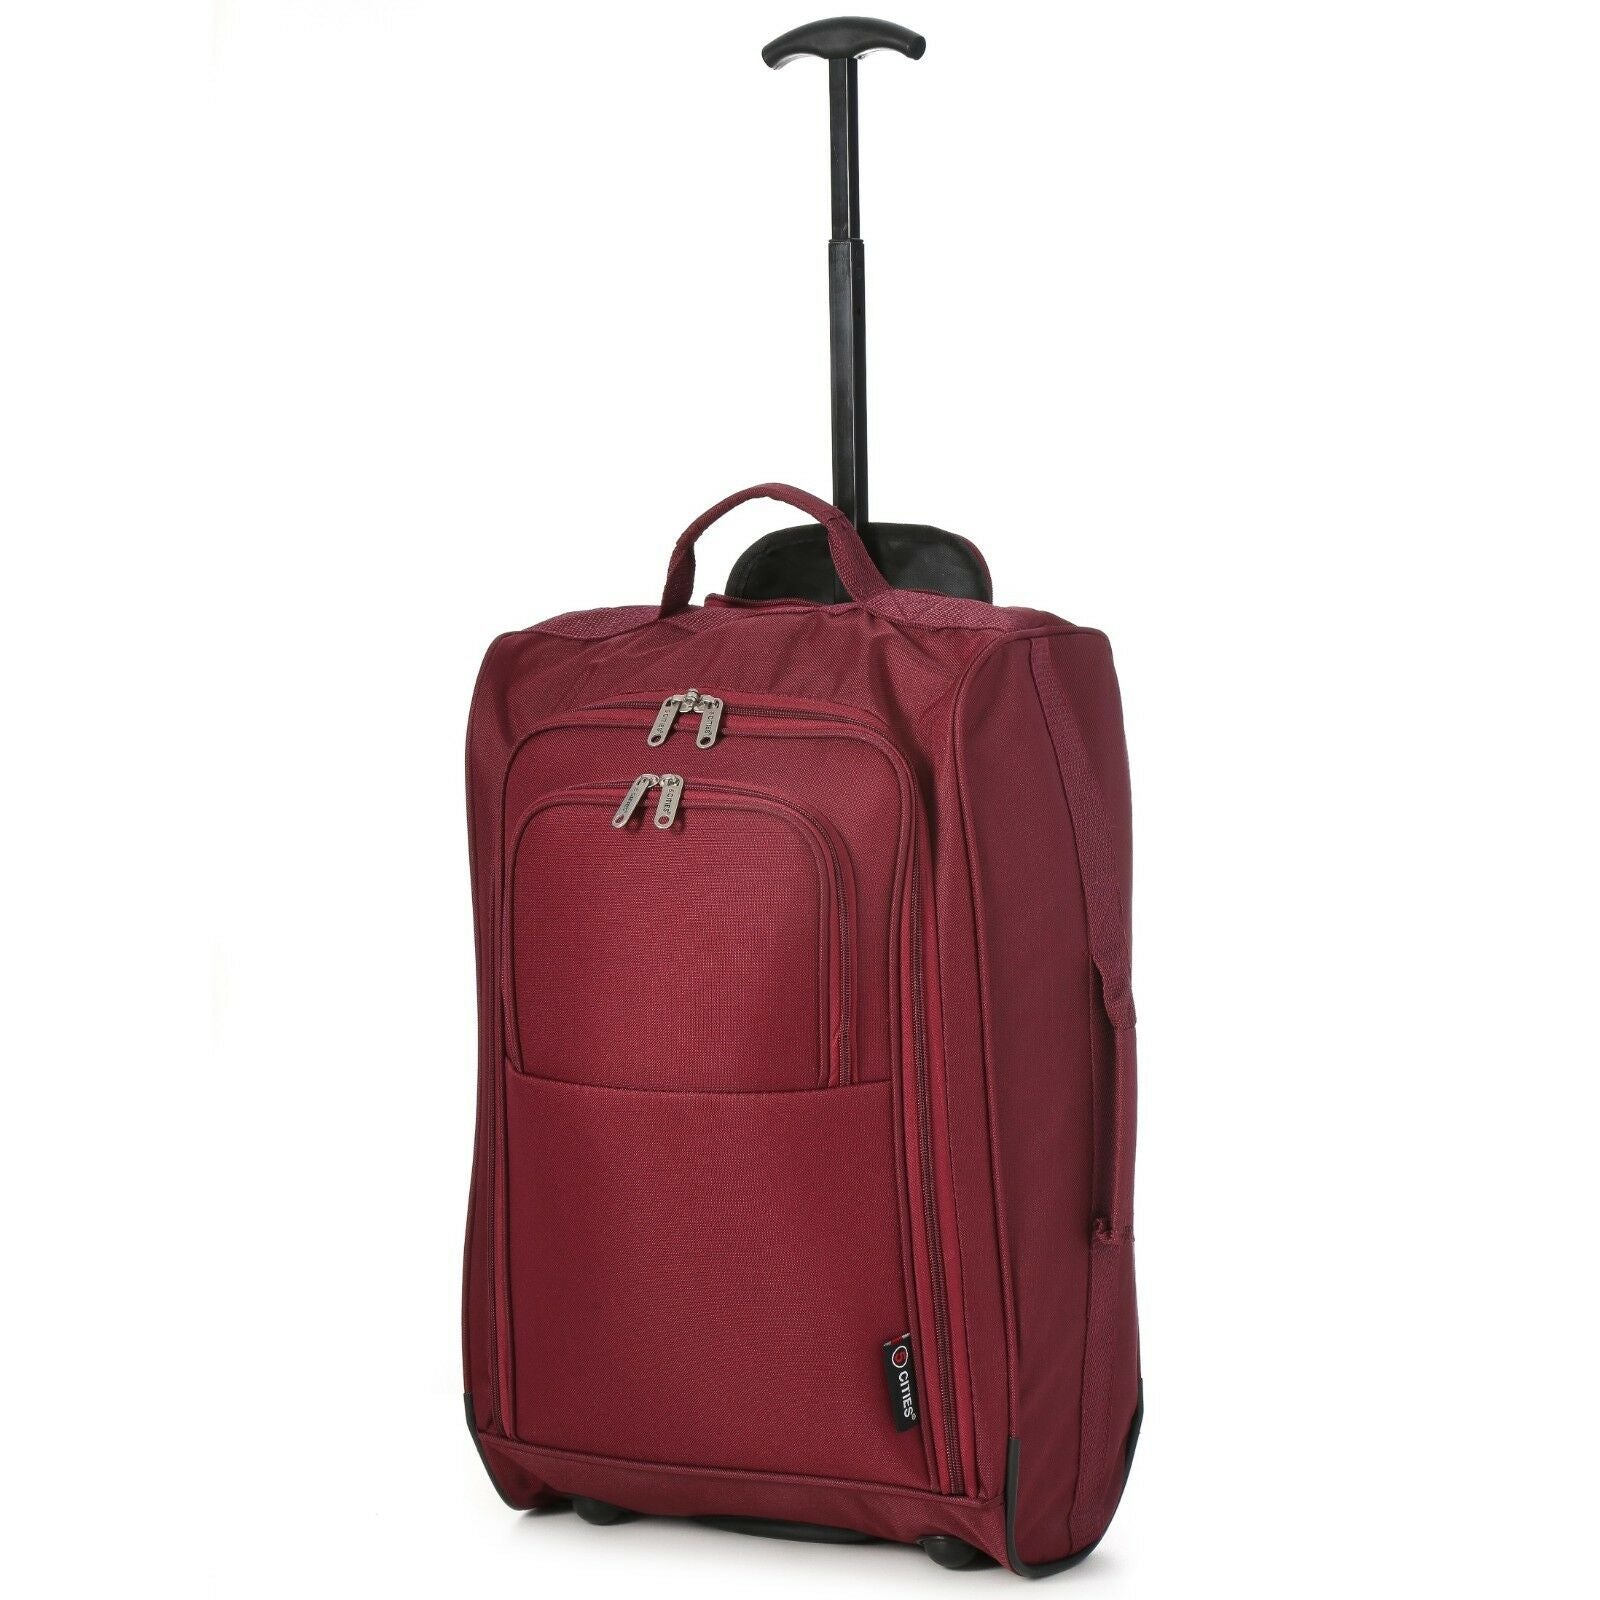 5 Cities 21" (55x35x20cm) Lightweight Cabin Hand Luggage Trolley, Fits easyJet(Plus/Flexi/Large Cabin), Ryanair (Priority) Cabin Restrictions, 2 Years Of Warranty